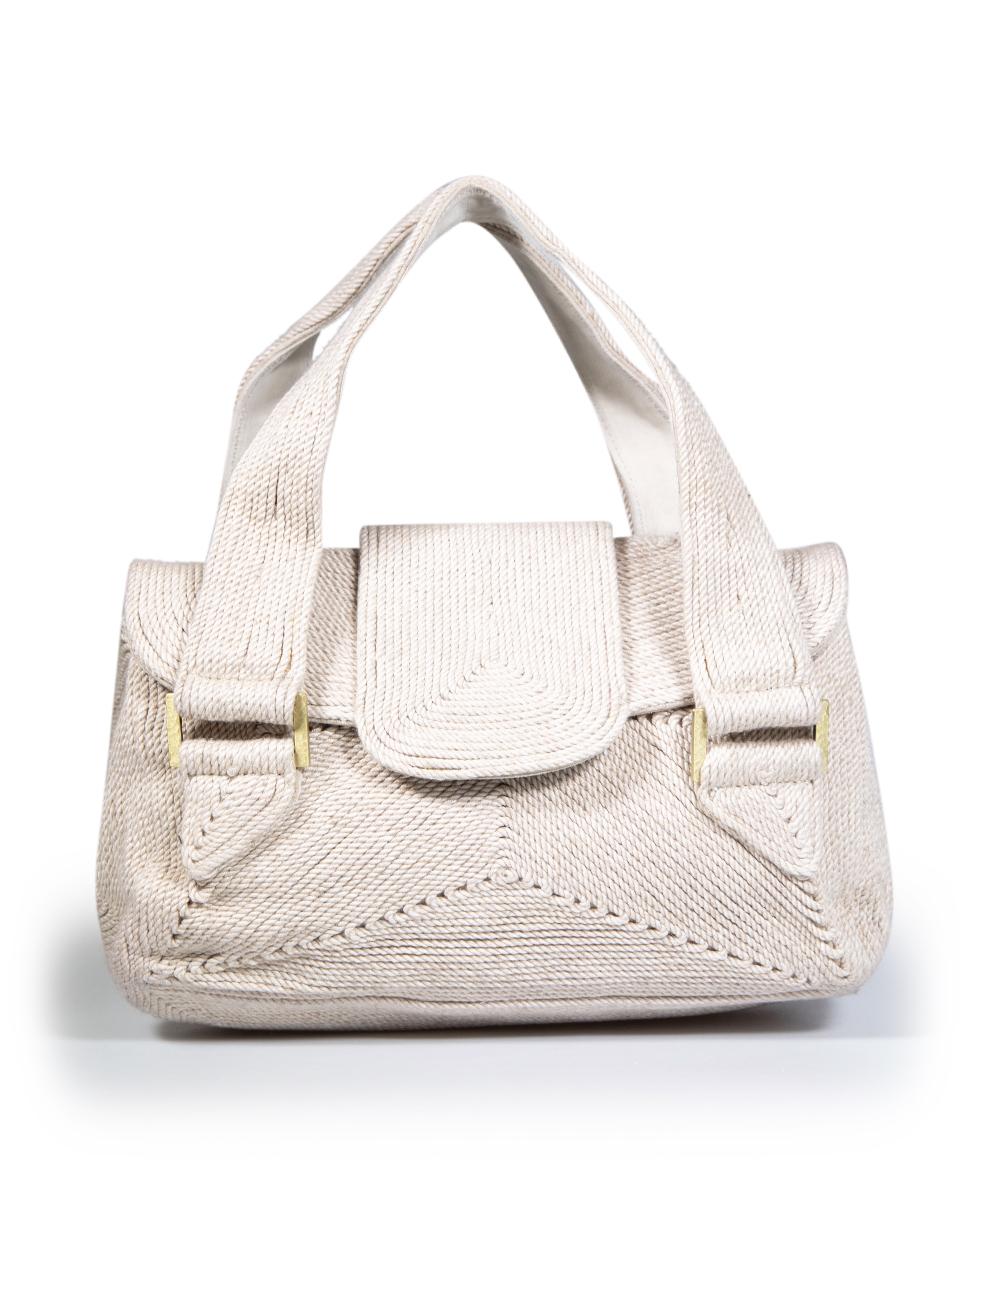 Herve Leger Beige Woven Handbag In New Condition For Sale In London, GB